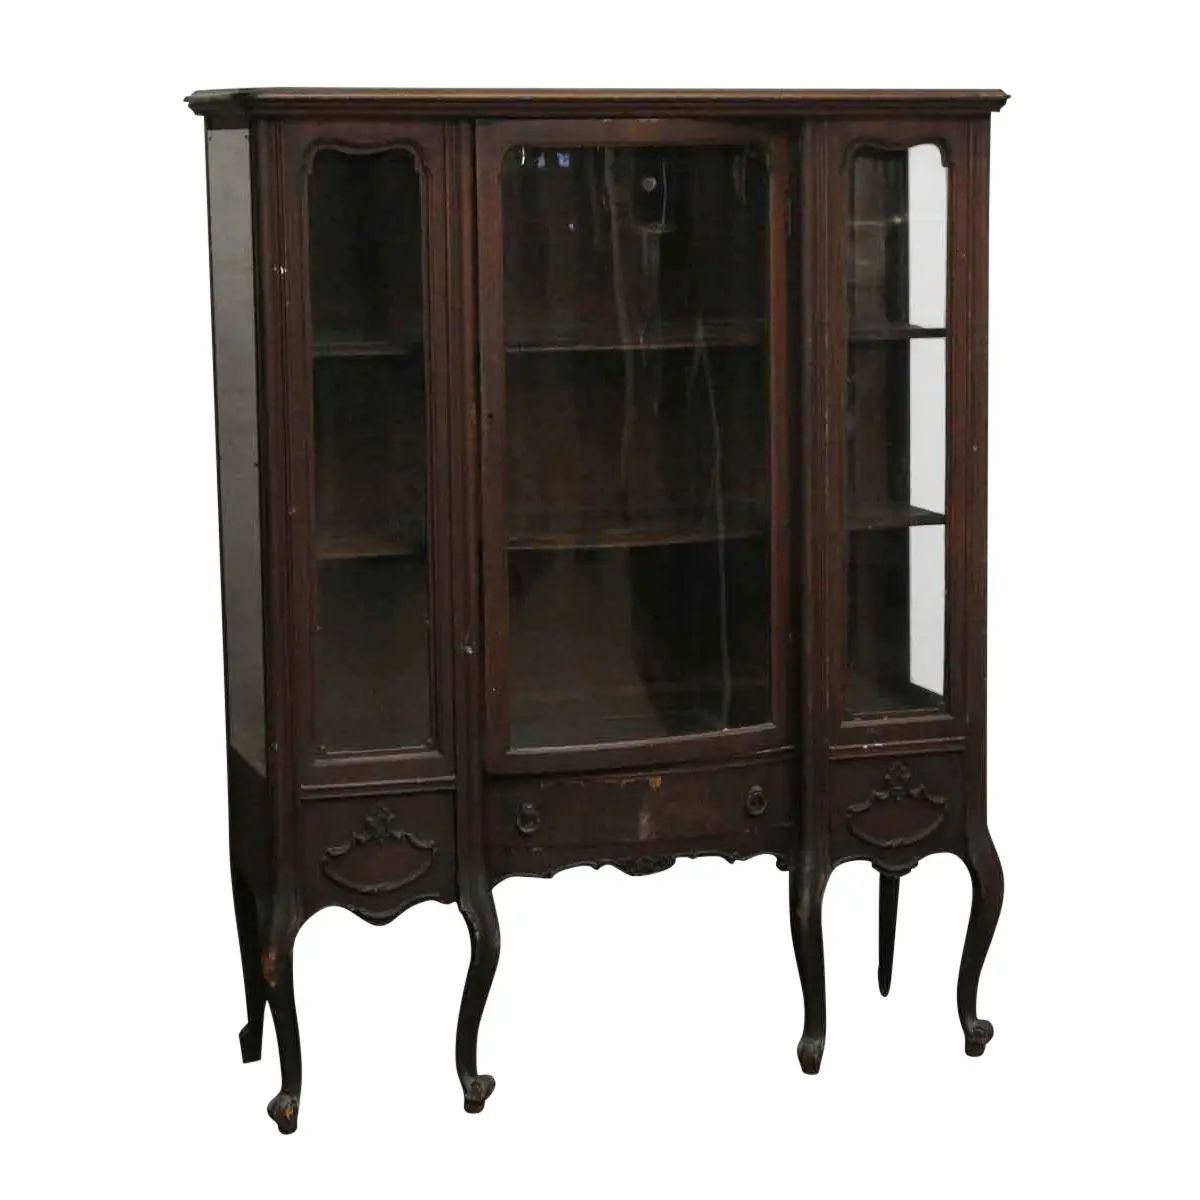 20th Century Traditional Curved Leg Wooden Curio Cabinet | Chairish